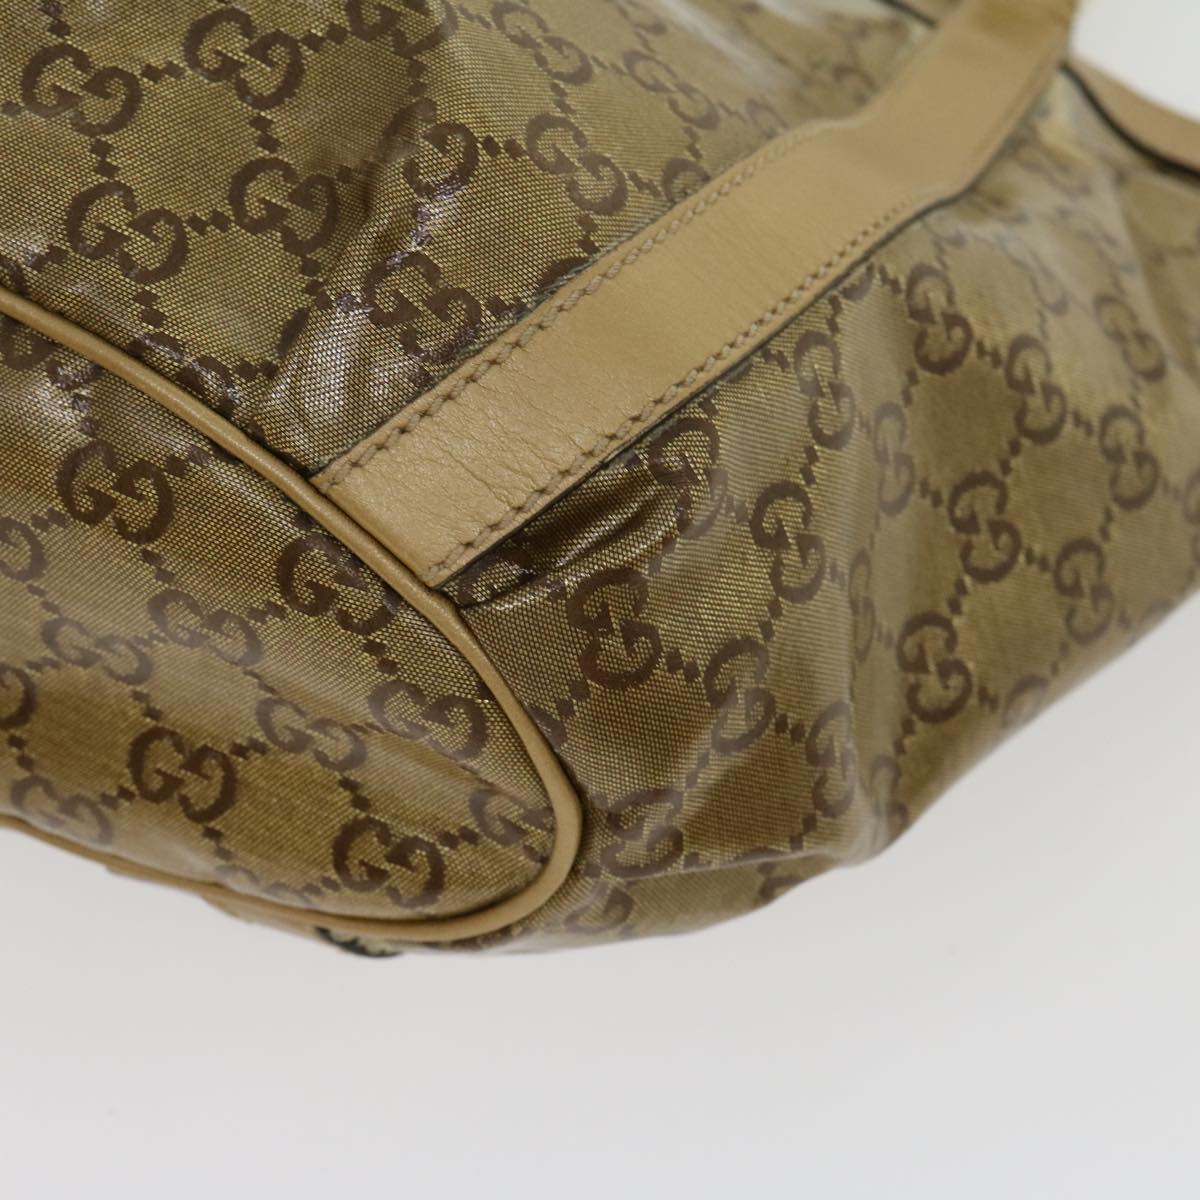 GUCCI GG Canvas Tote Bag Beige Gold 211983204991 Auth bs1798